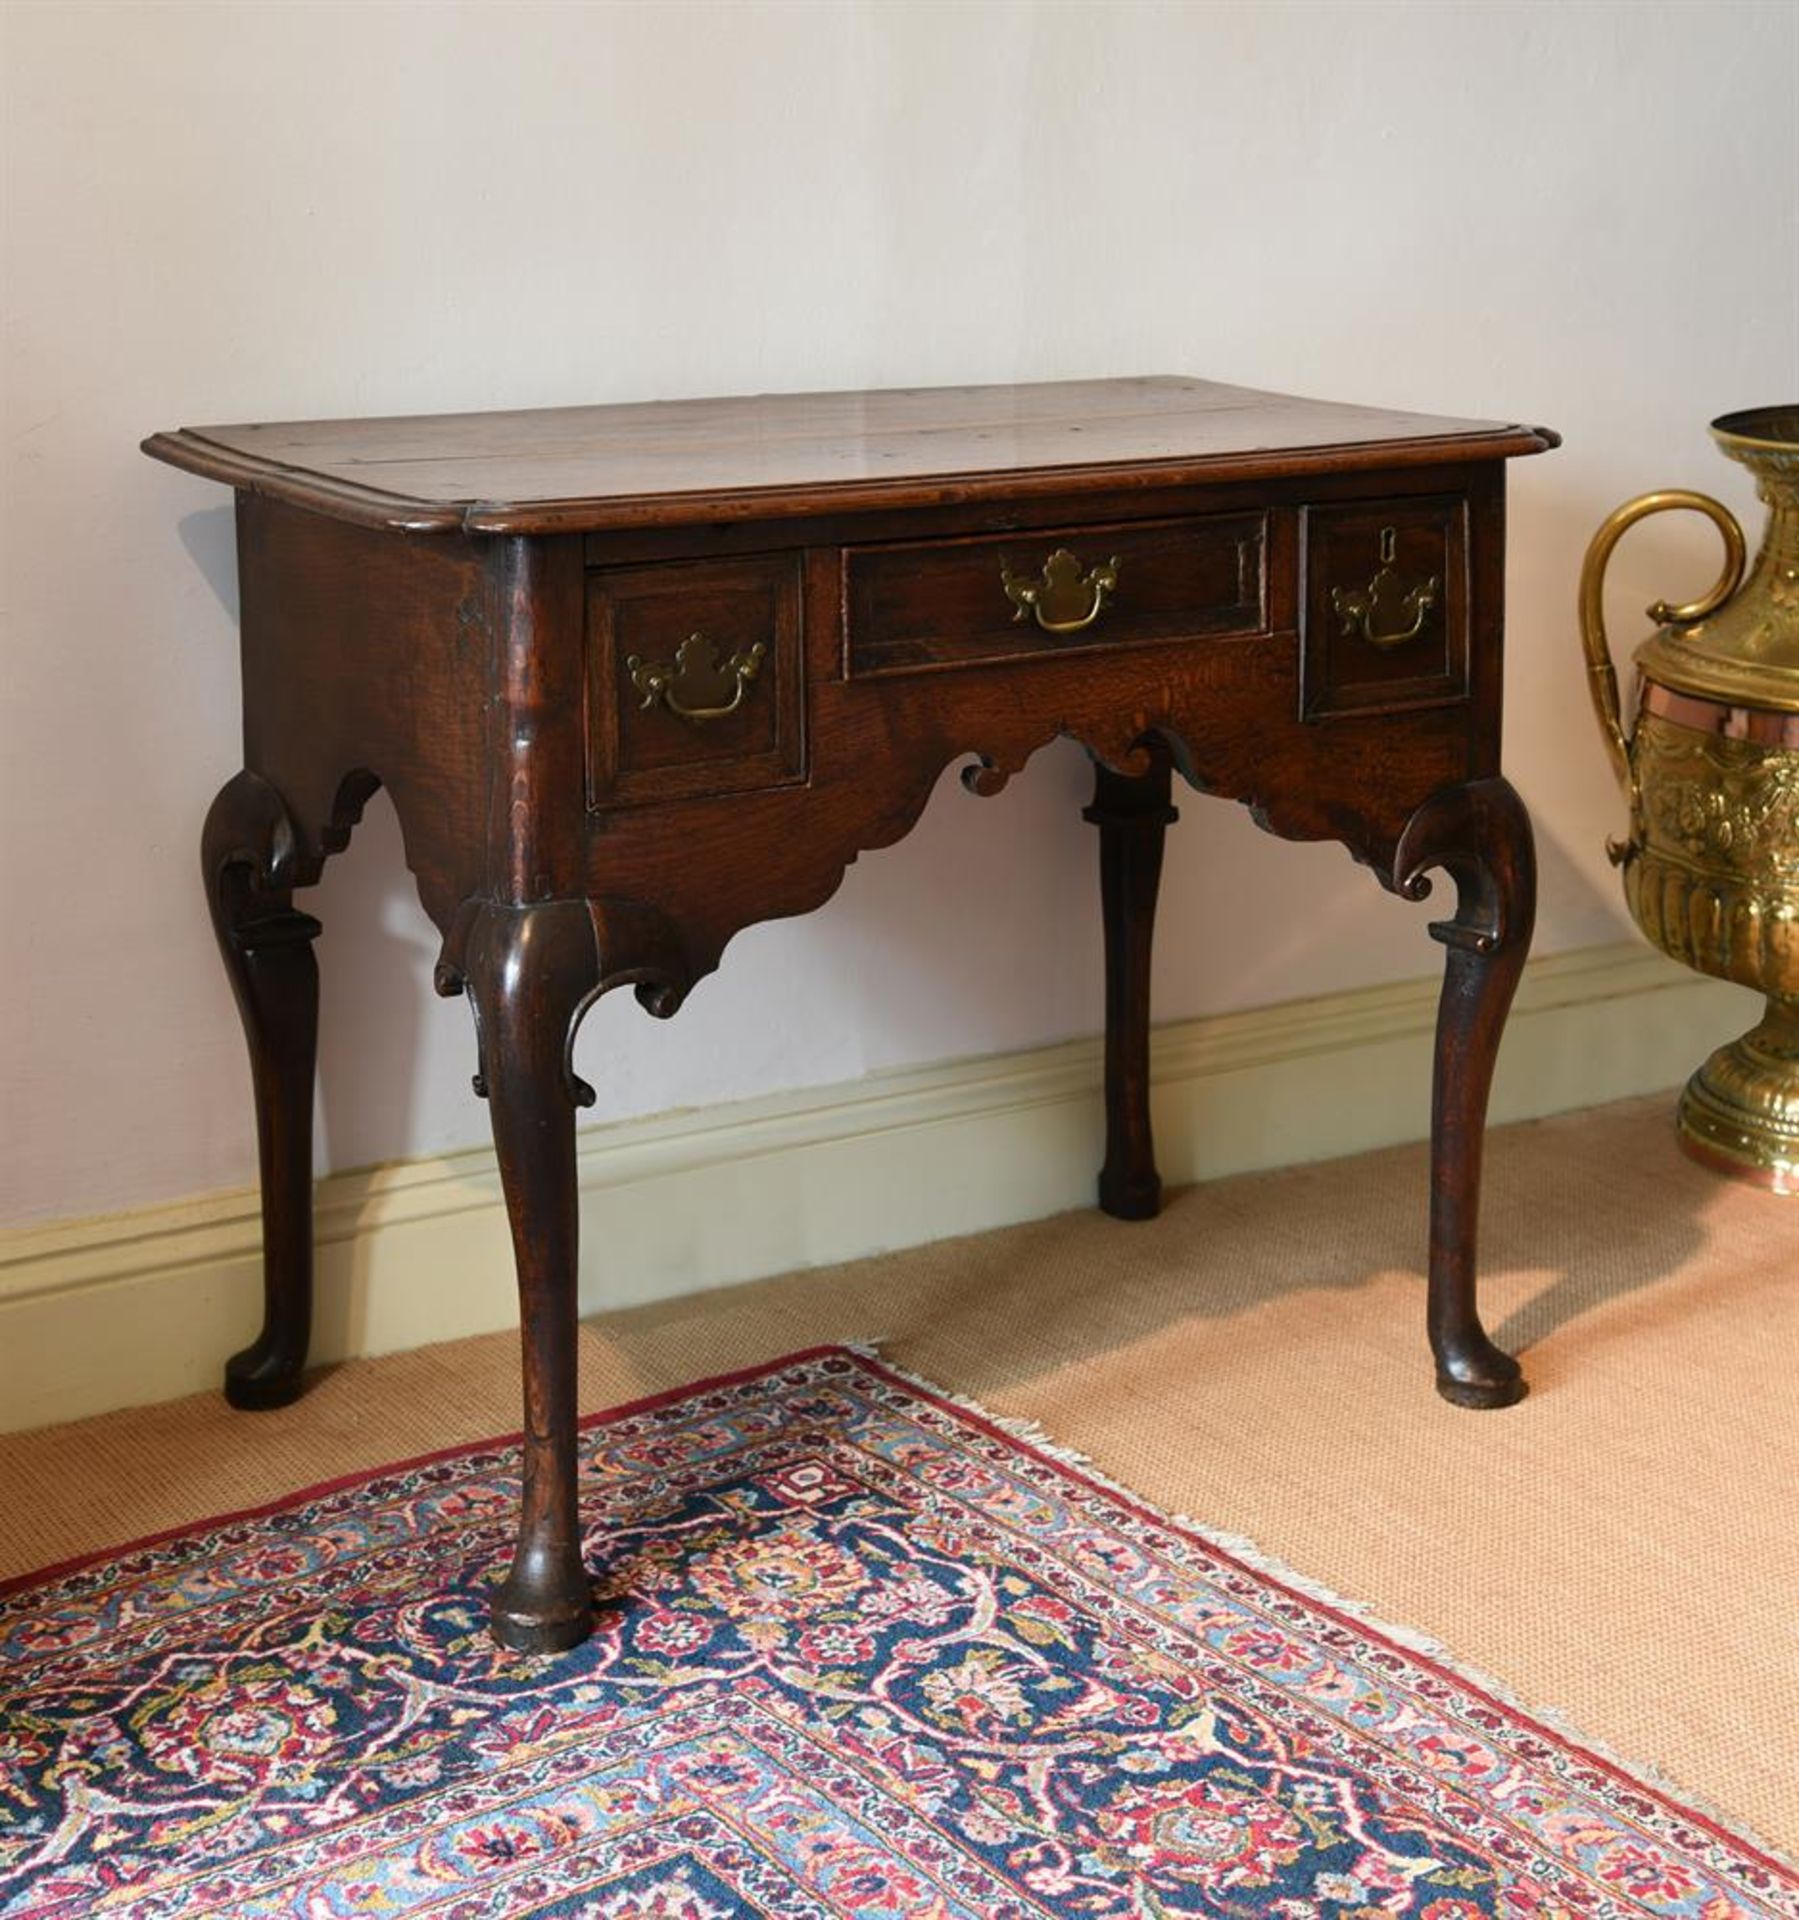 AN OAK AND CROSSBANDED SIDE TABLE, SECOND QUARTER 18TH CENTURY